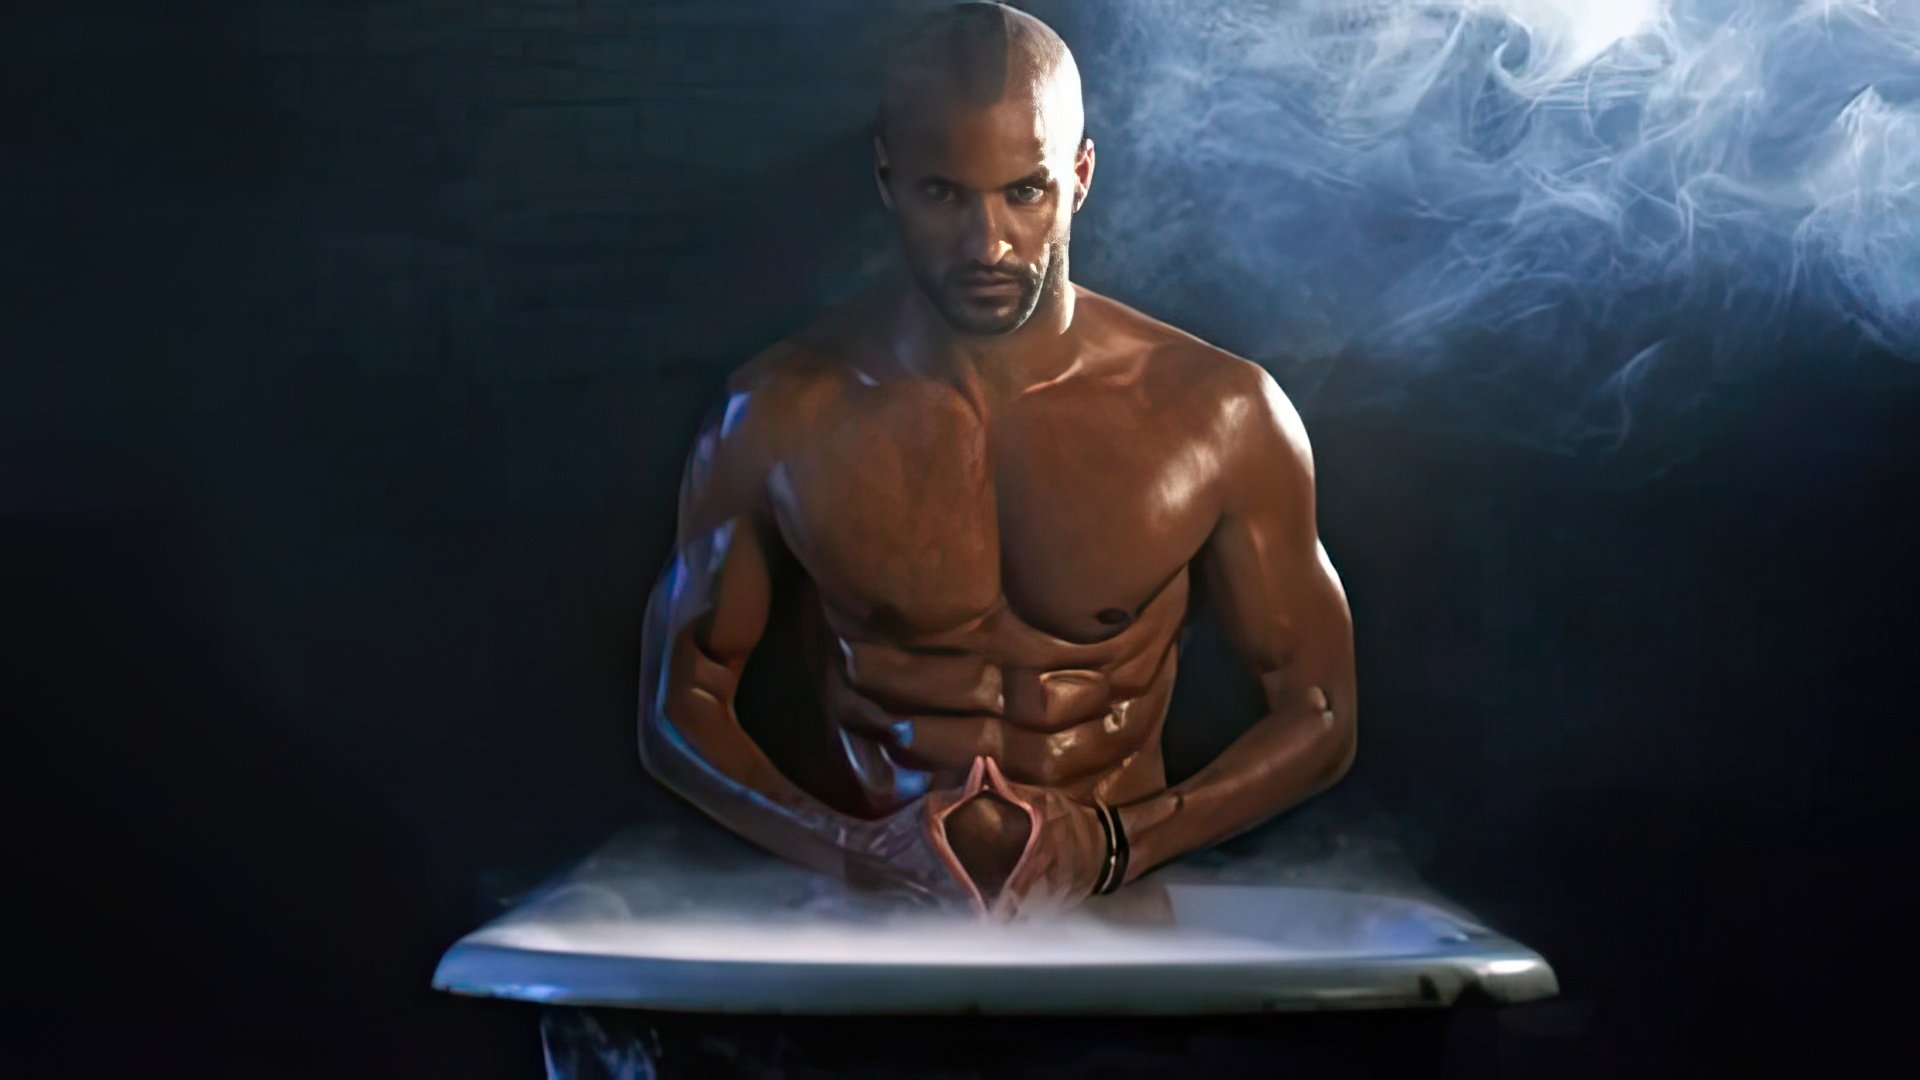 Ricky Whittle began his career as a model